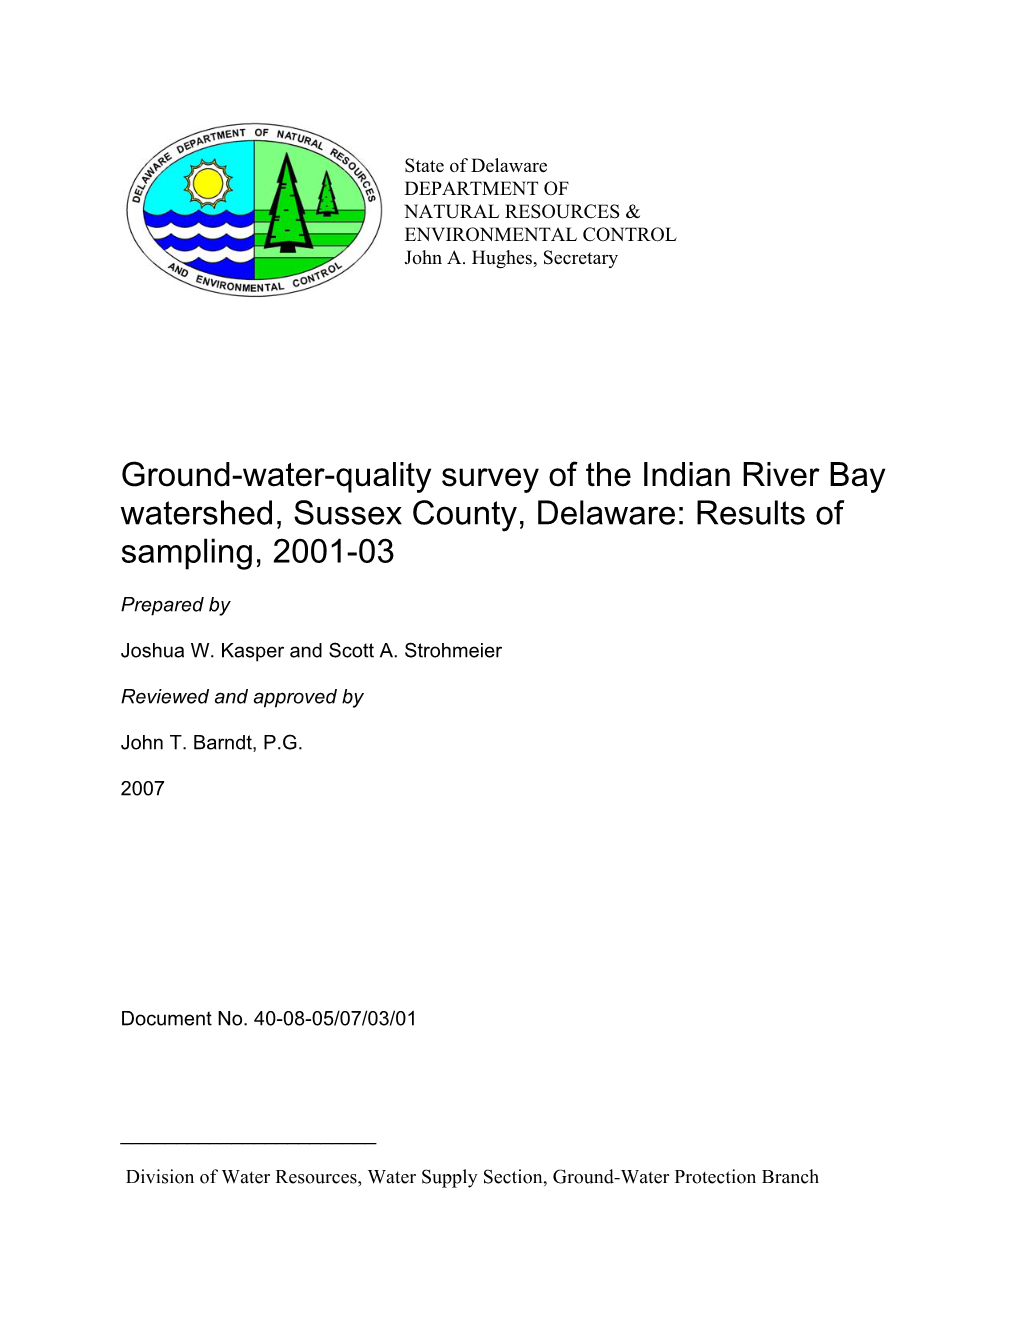 Ground-Water-Quality Survey of the Indian River Bay Watershed, Sussex County, Delaware: Results of Sampling, 2001-03